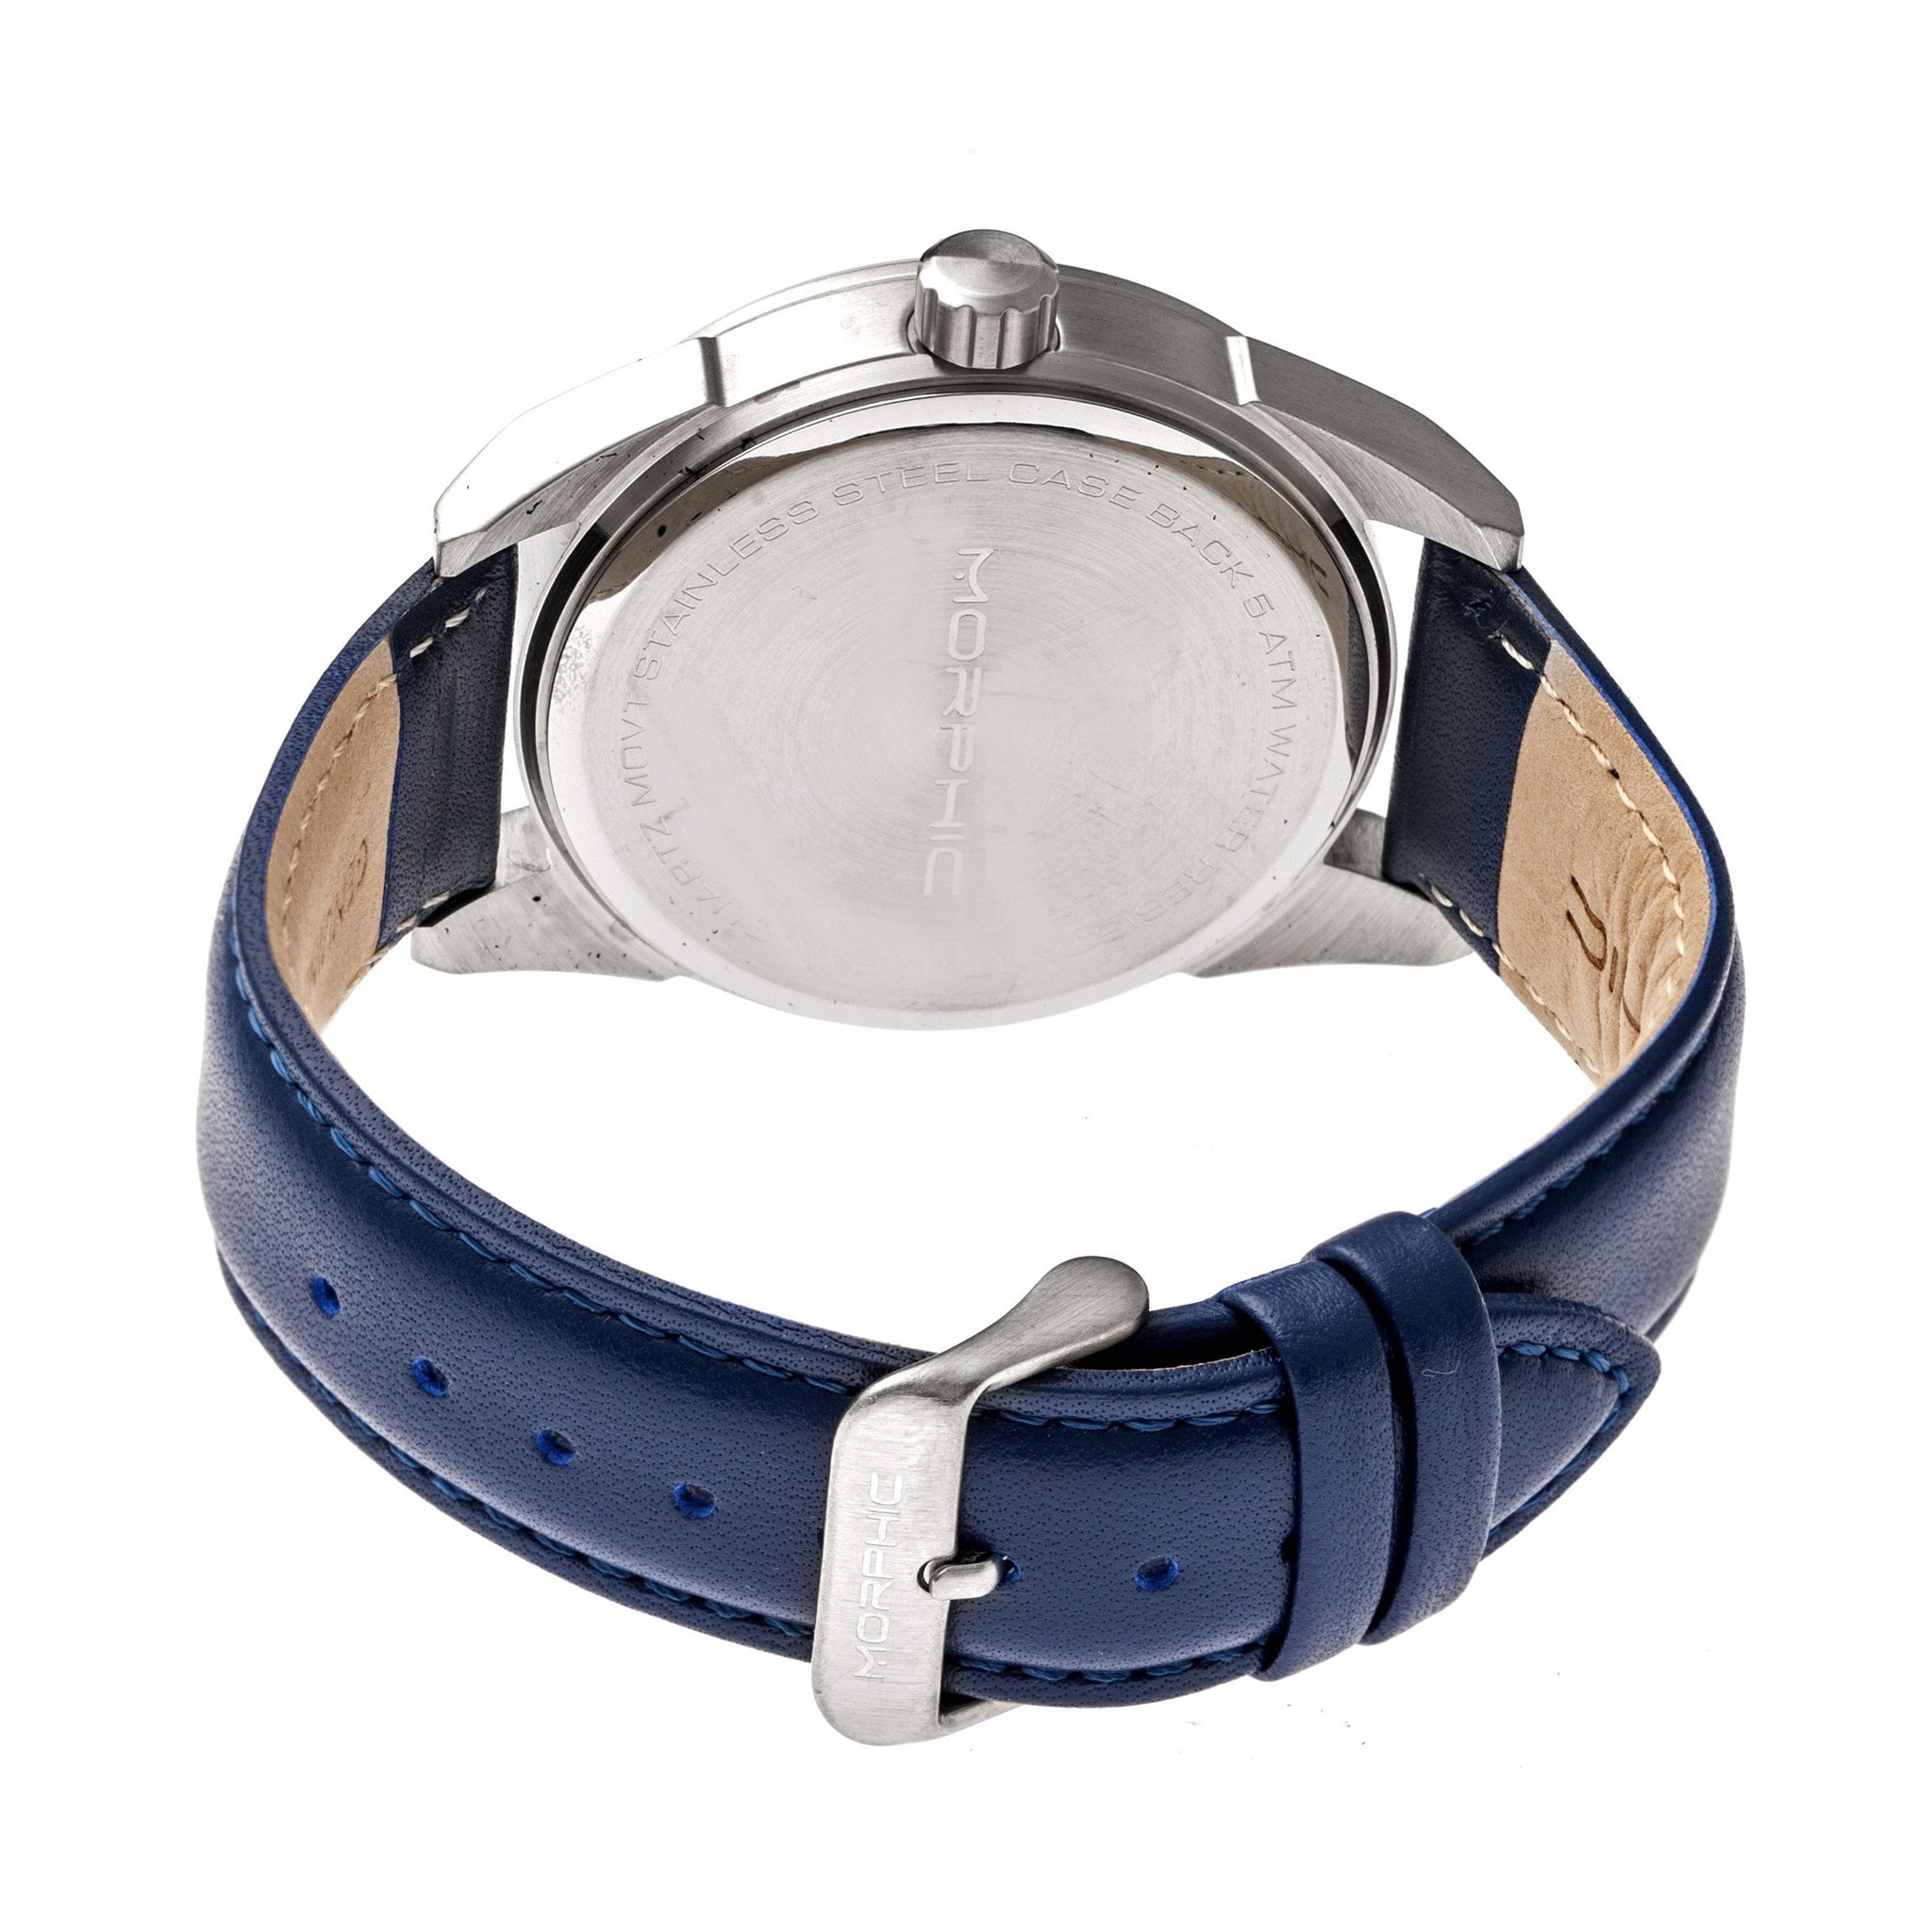 Morphic M63 Series Leather-Band Watch w/Date - Black/Blue - MPH6308